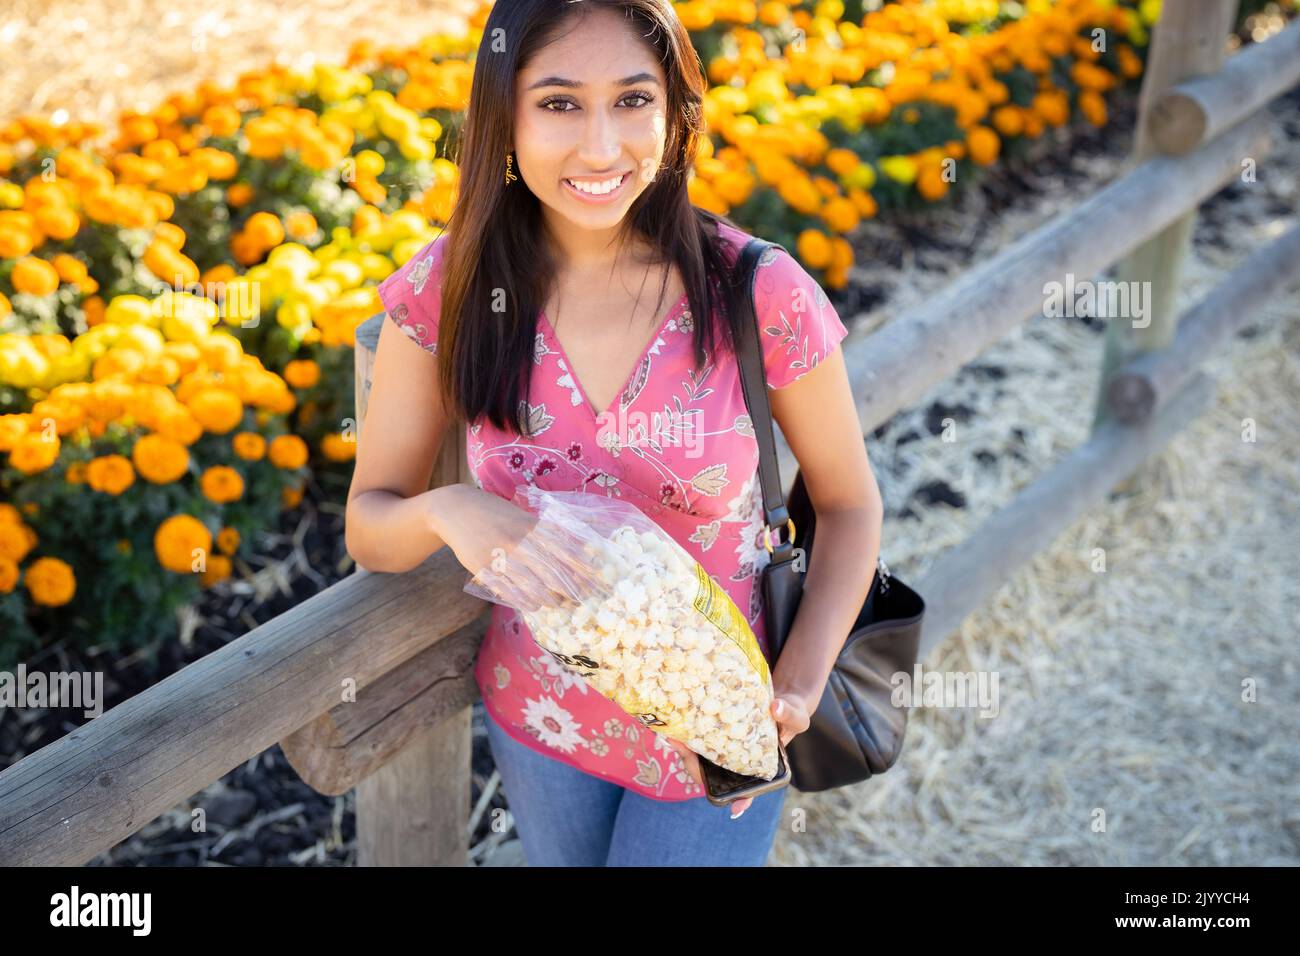 Fall Celebration Portrait of Young Asian Woman Standing in Front of a Field of Orange and Yellow Marigolds | Eating Kettle Co Stock Photo